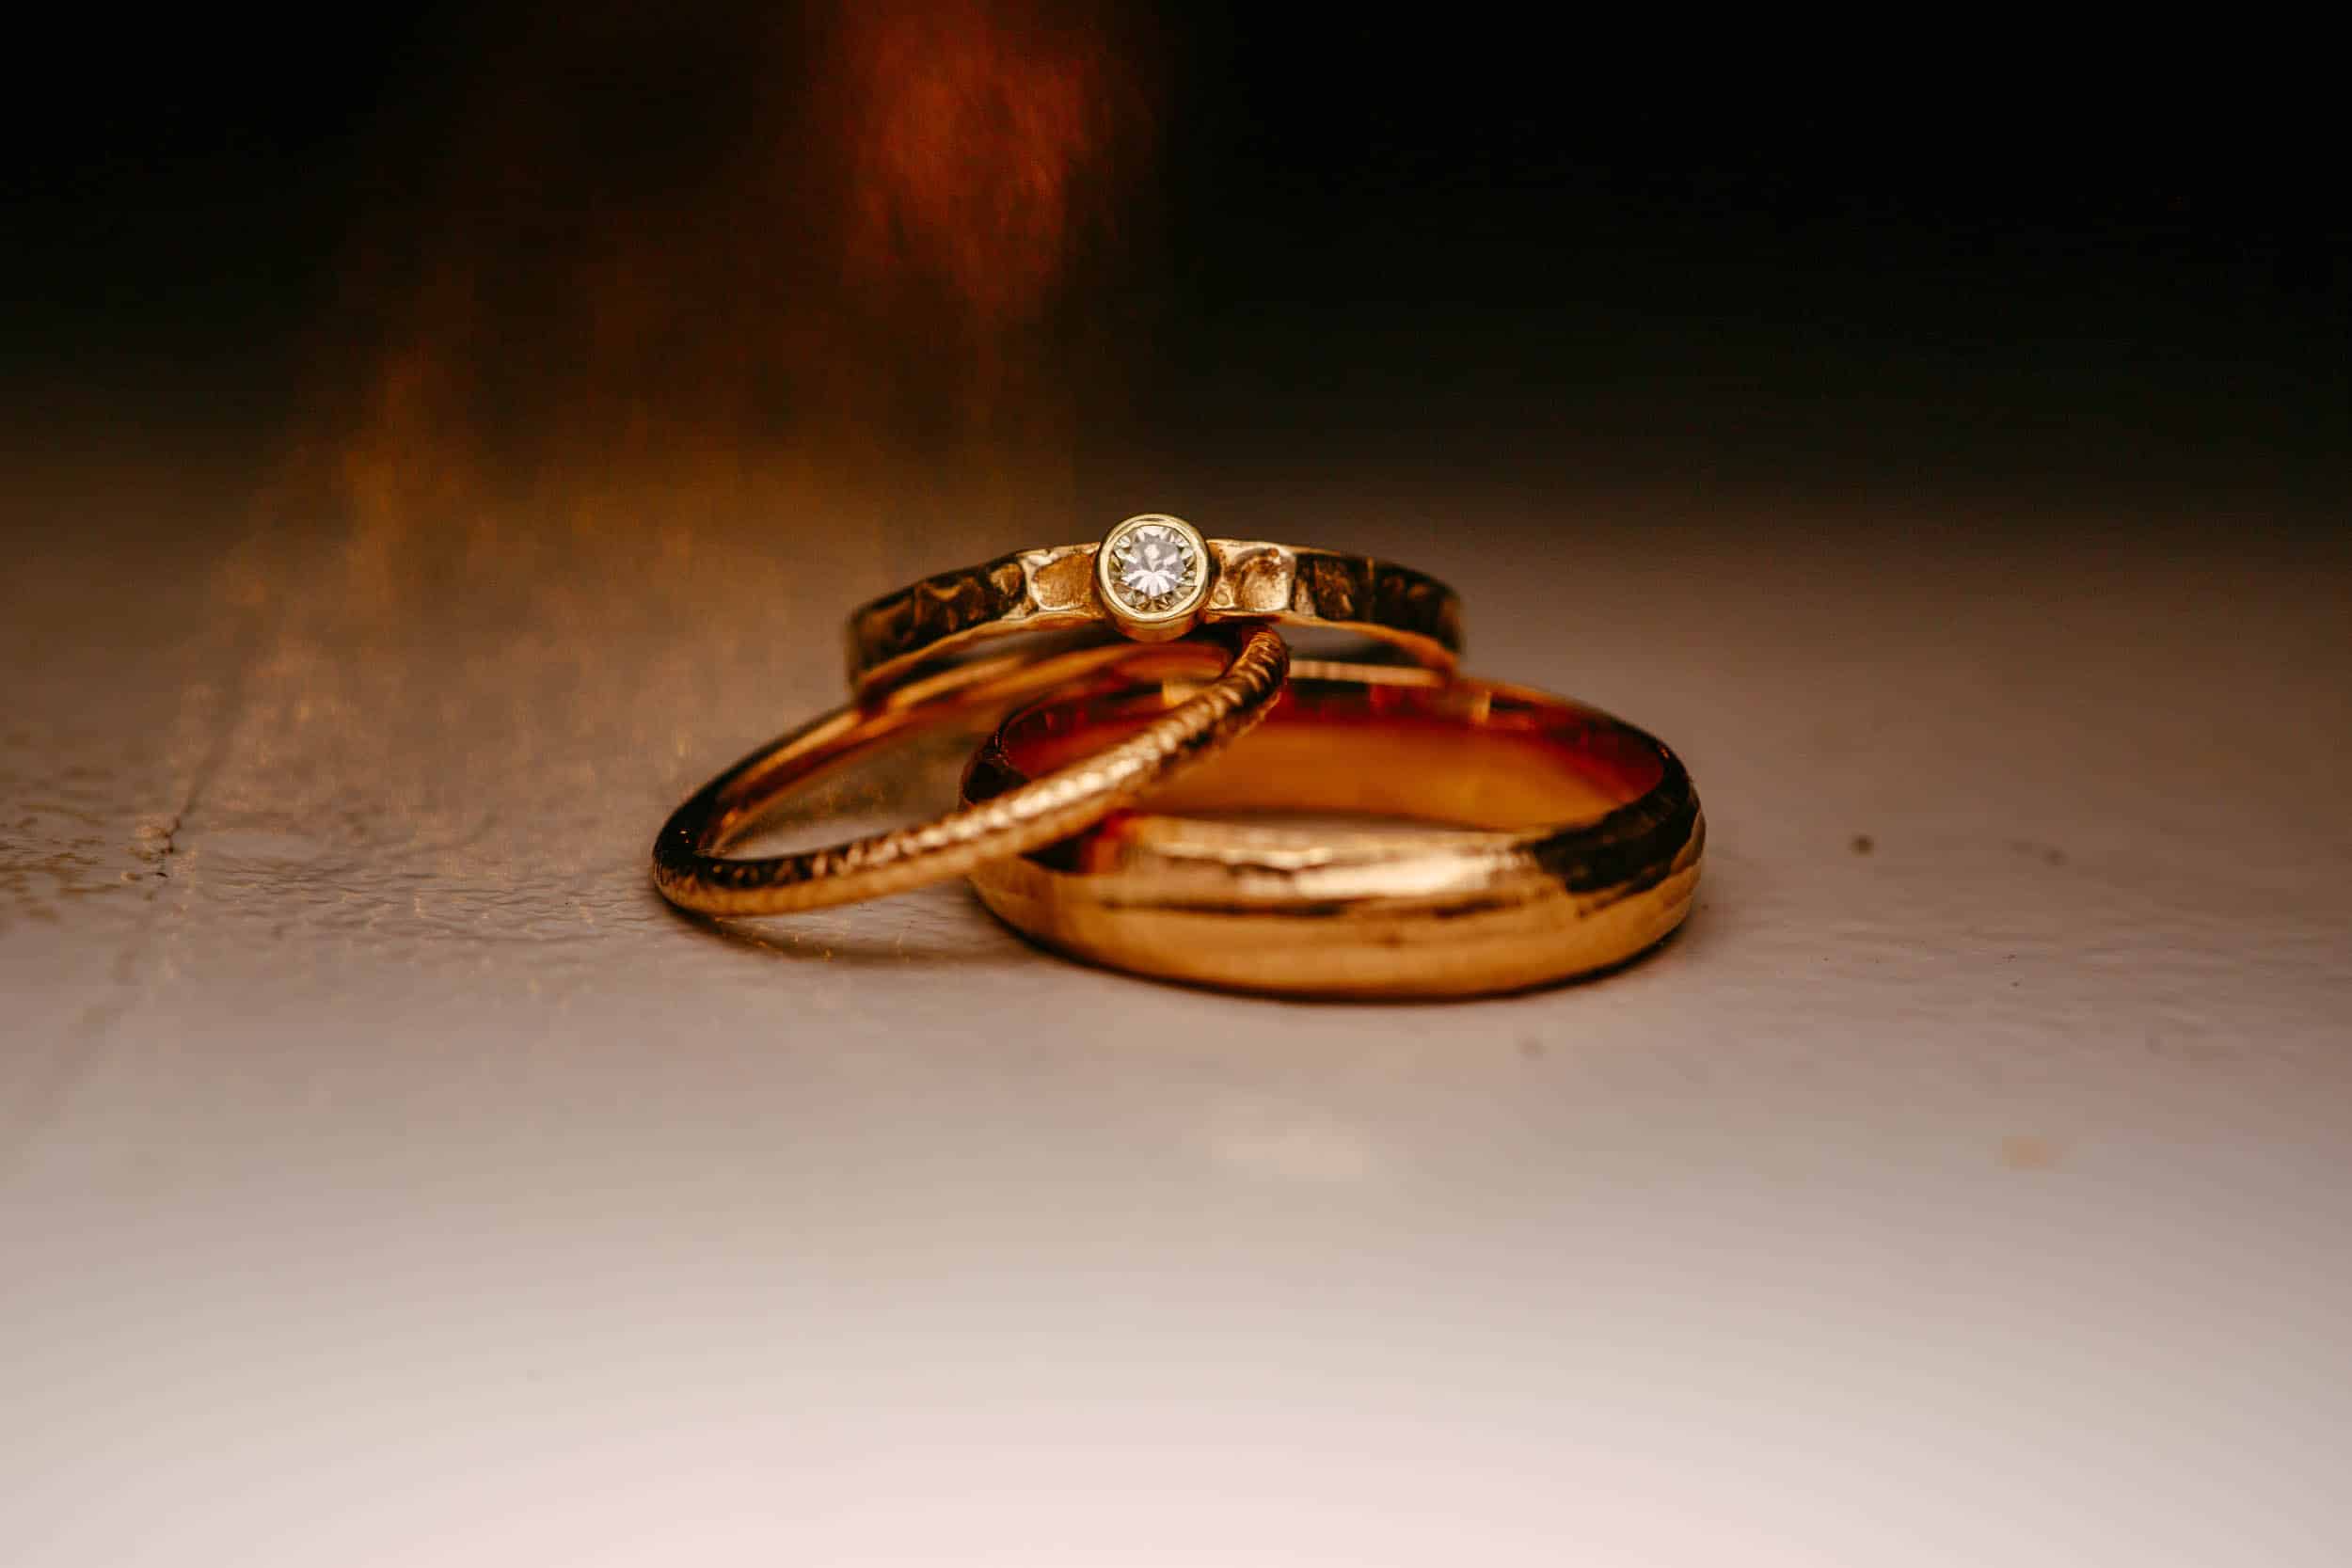 A pair of gold wedding rings on a table.